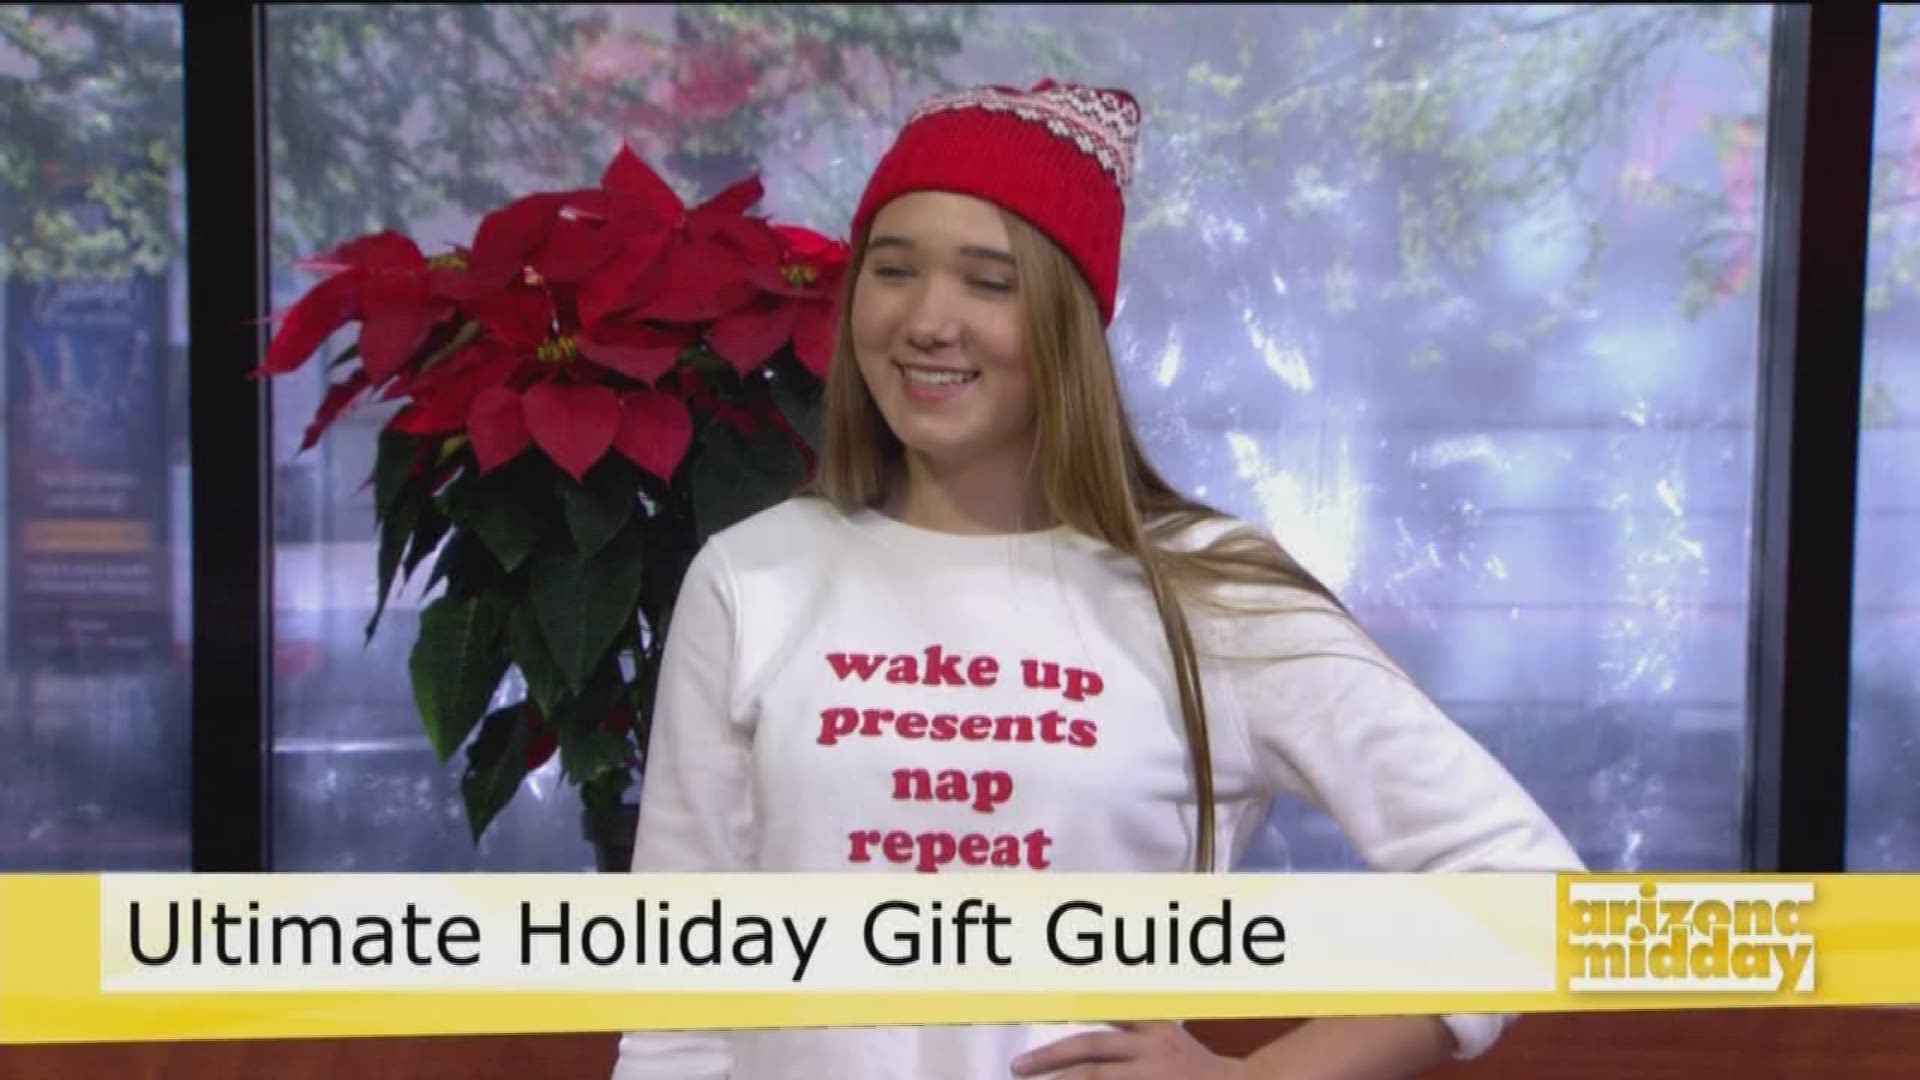 Danielle with Phoenix Premium Outlets gives us the scoop on holiday styles and deals!